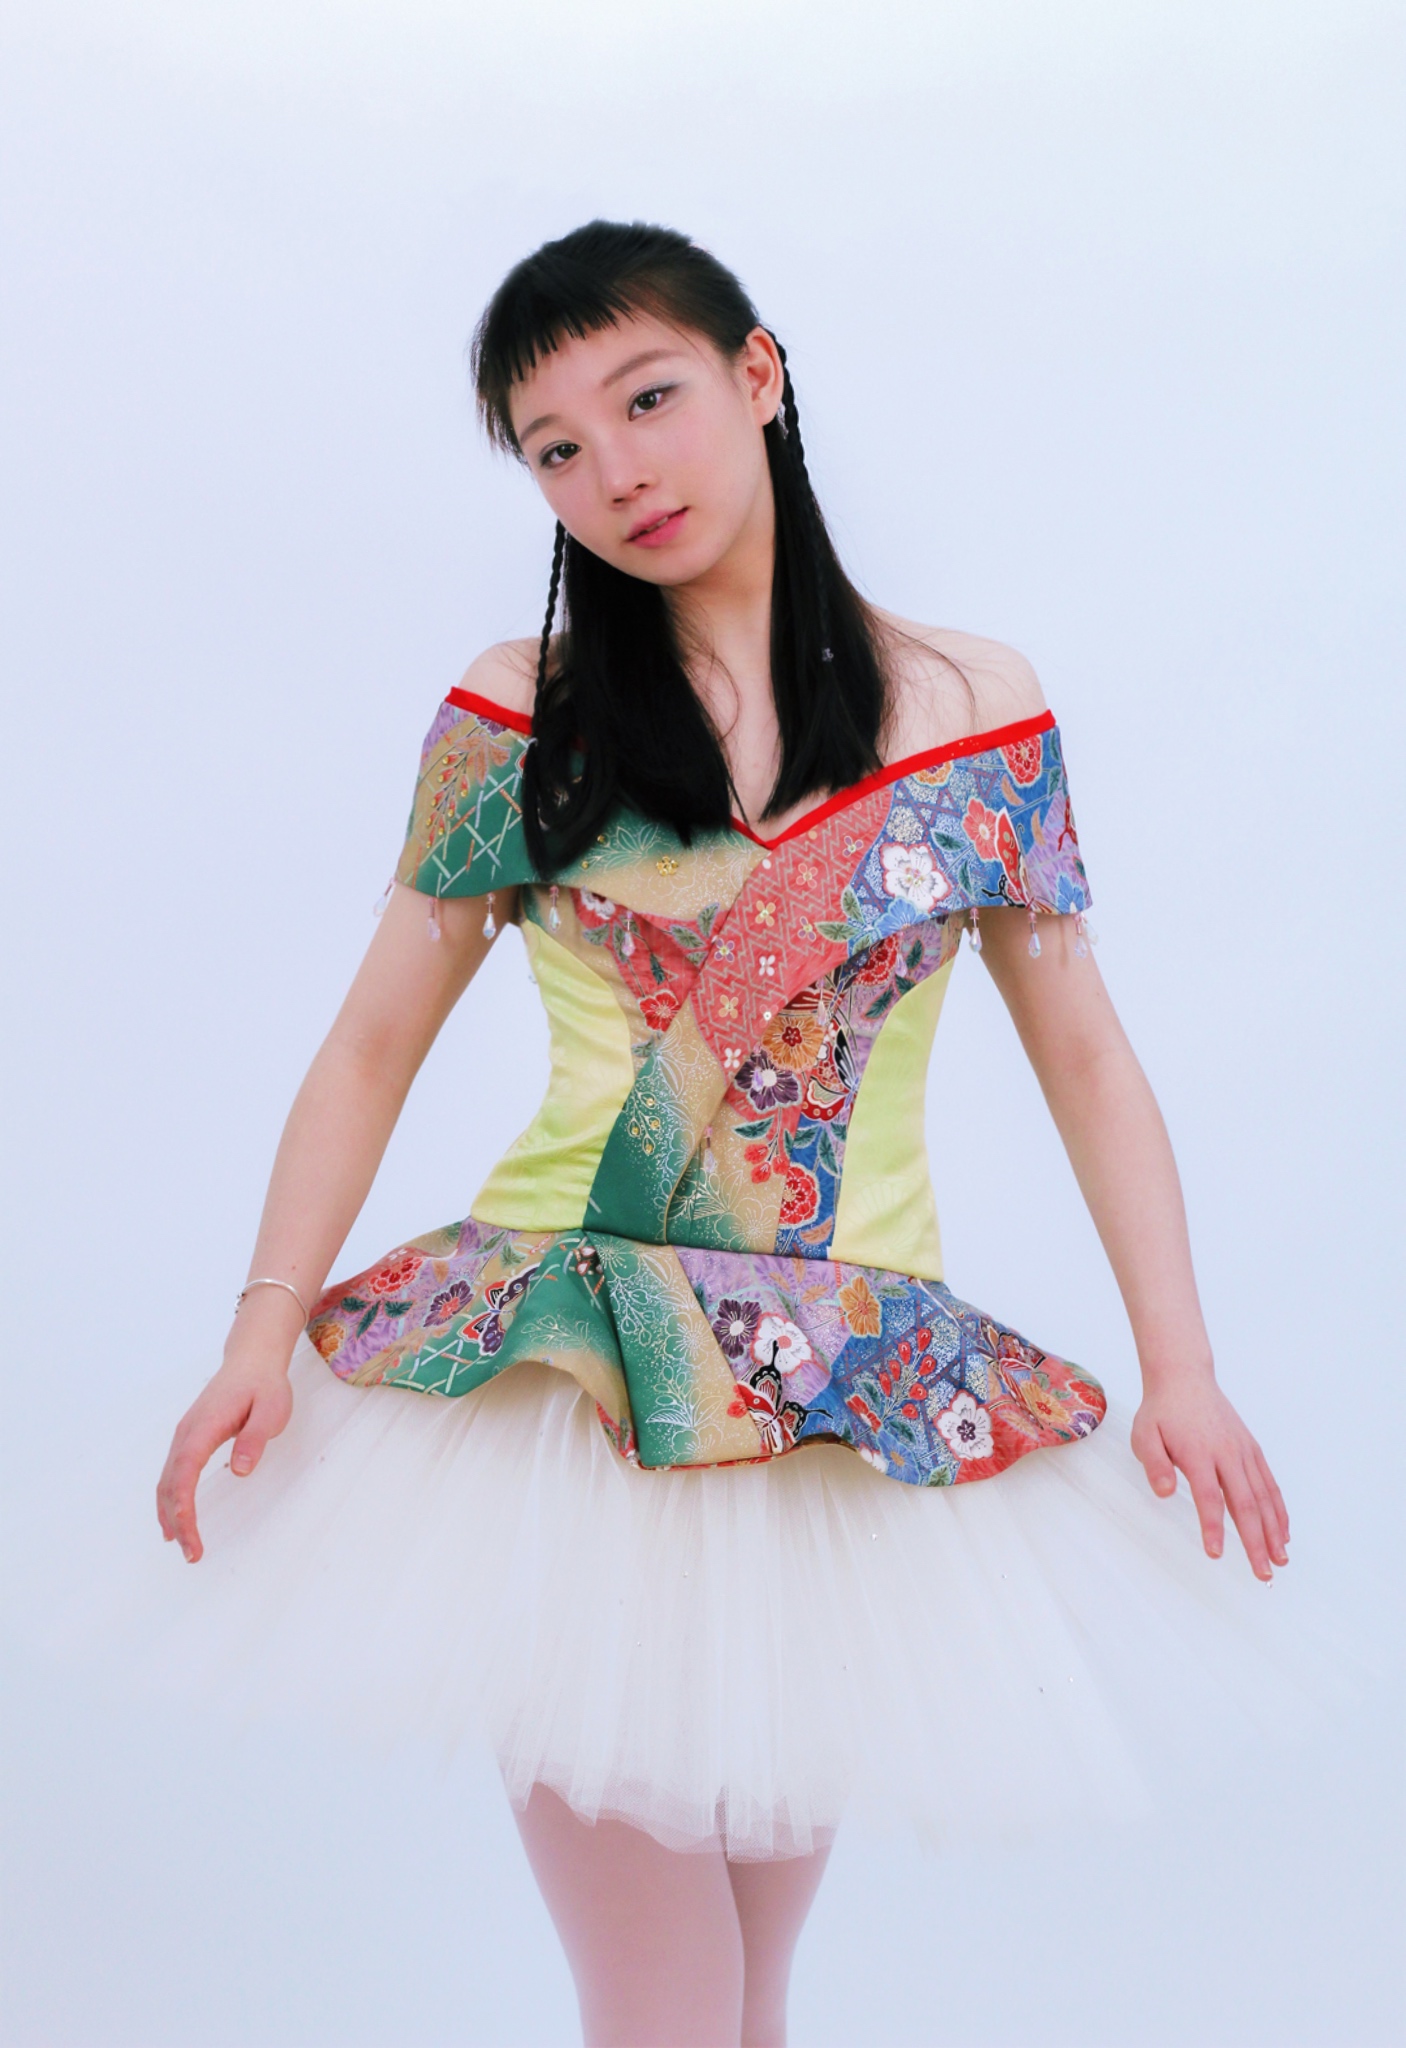 A kimono-inspired silk printed bodice top with classical ballet tulle tutu. The photo shows a full view of a ballerina looking into the camera. She is facing front with her hands off to the side.